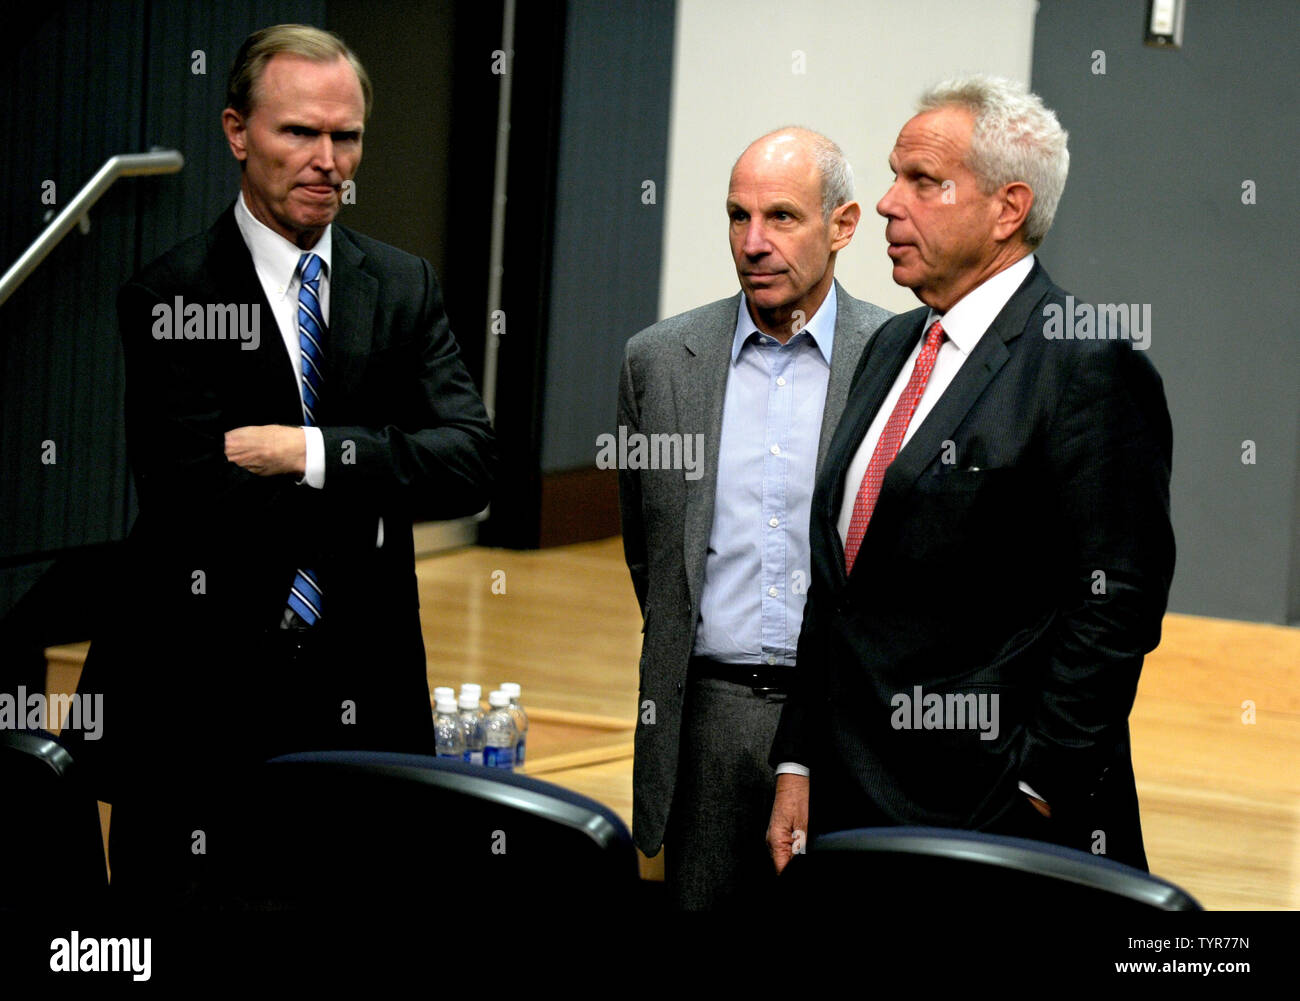 New York Giants president and chief executive officer John Mara, chairman  and executive vice president of the New York Giants Steve Tisch and  Chairman of Loews Hotels Jonathan Tisch wait for the